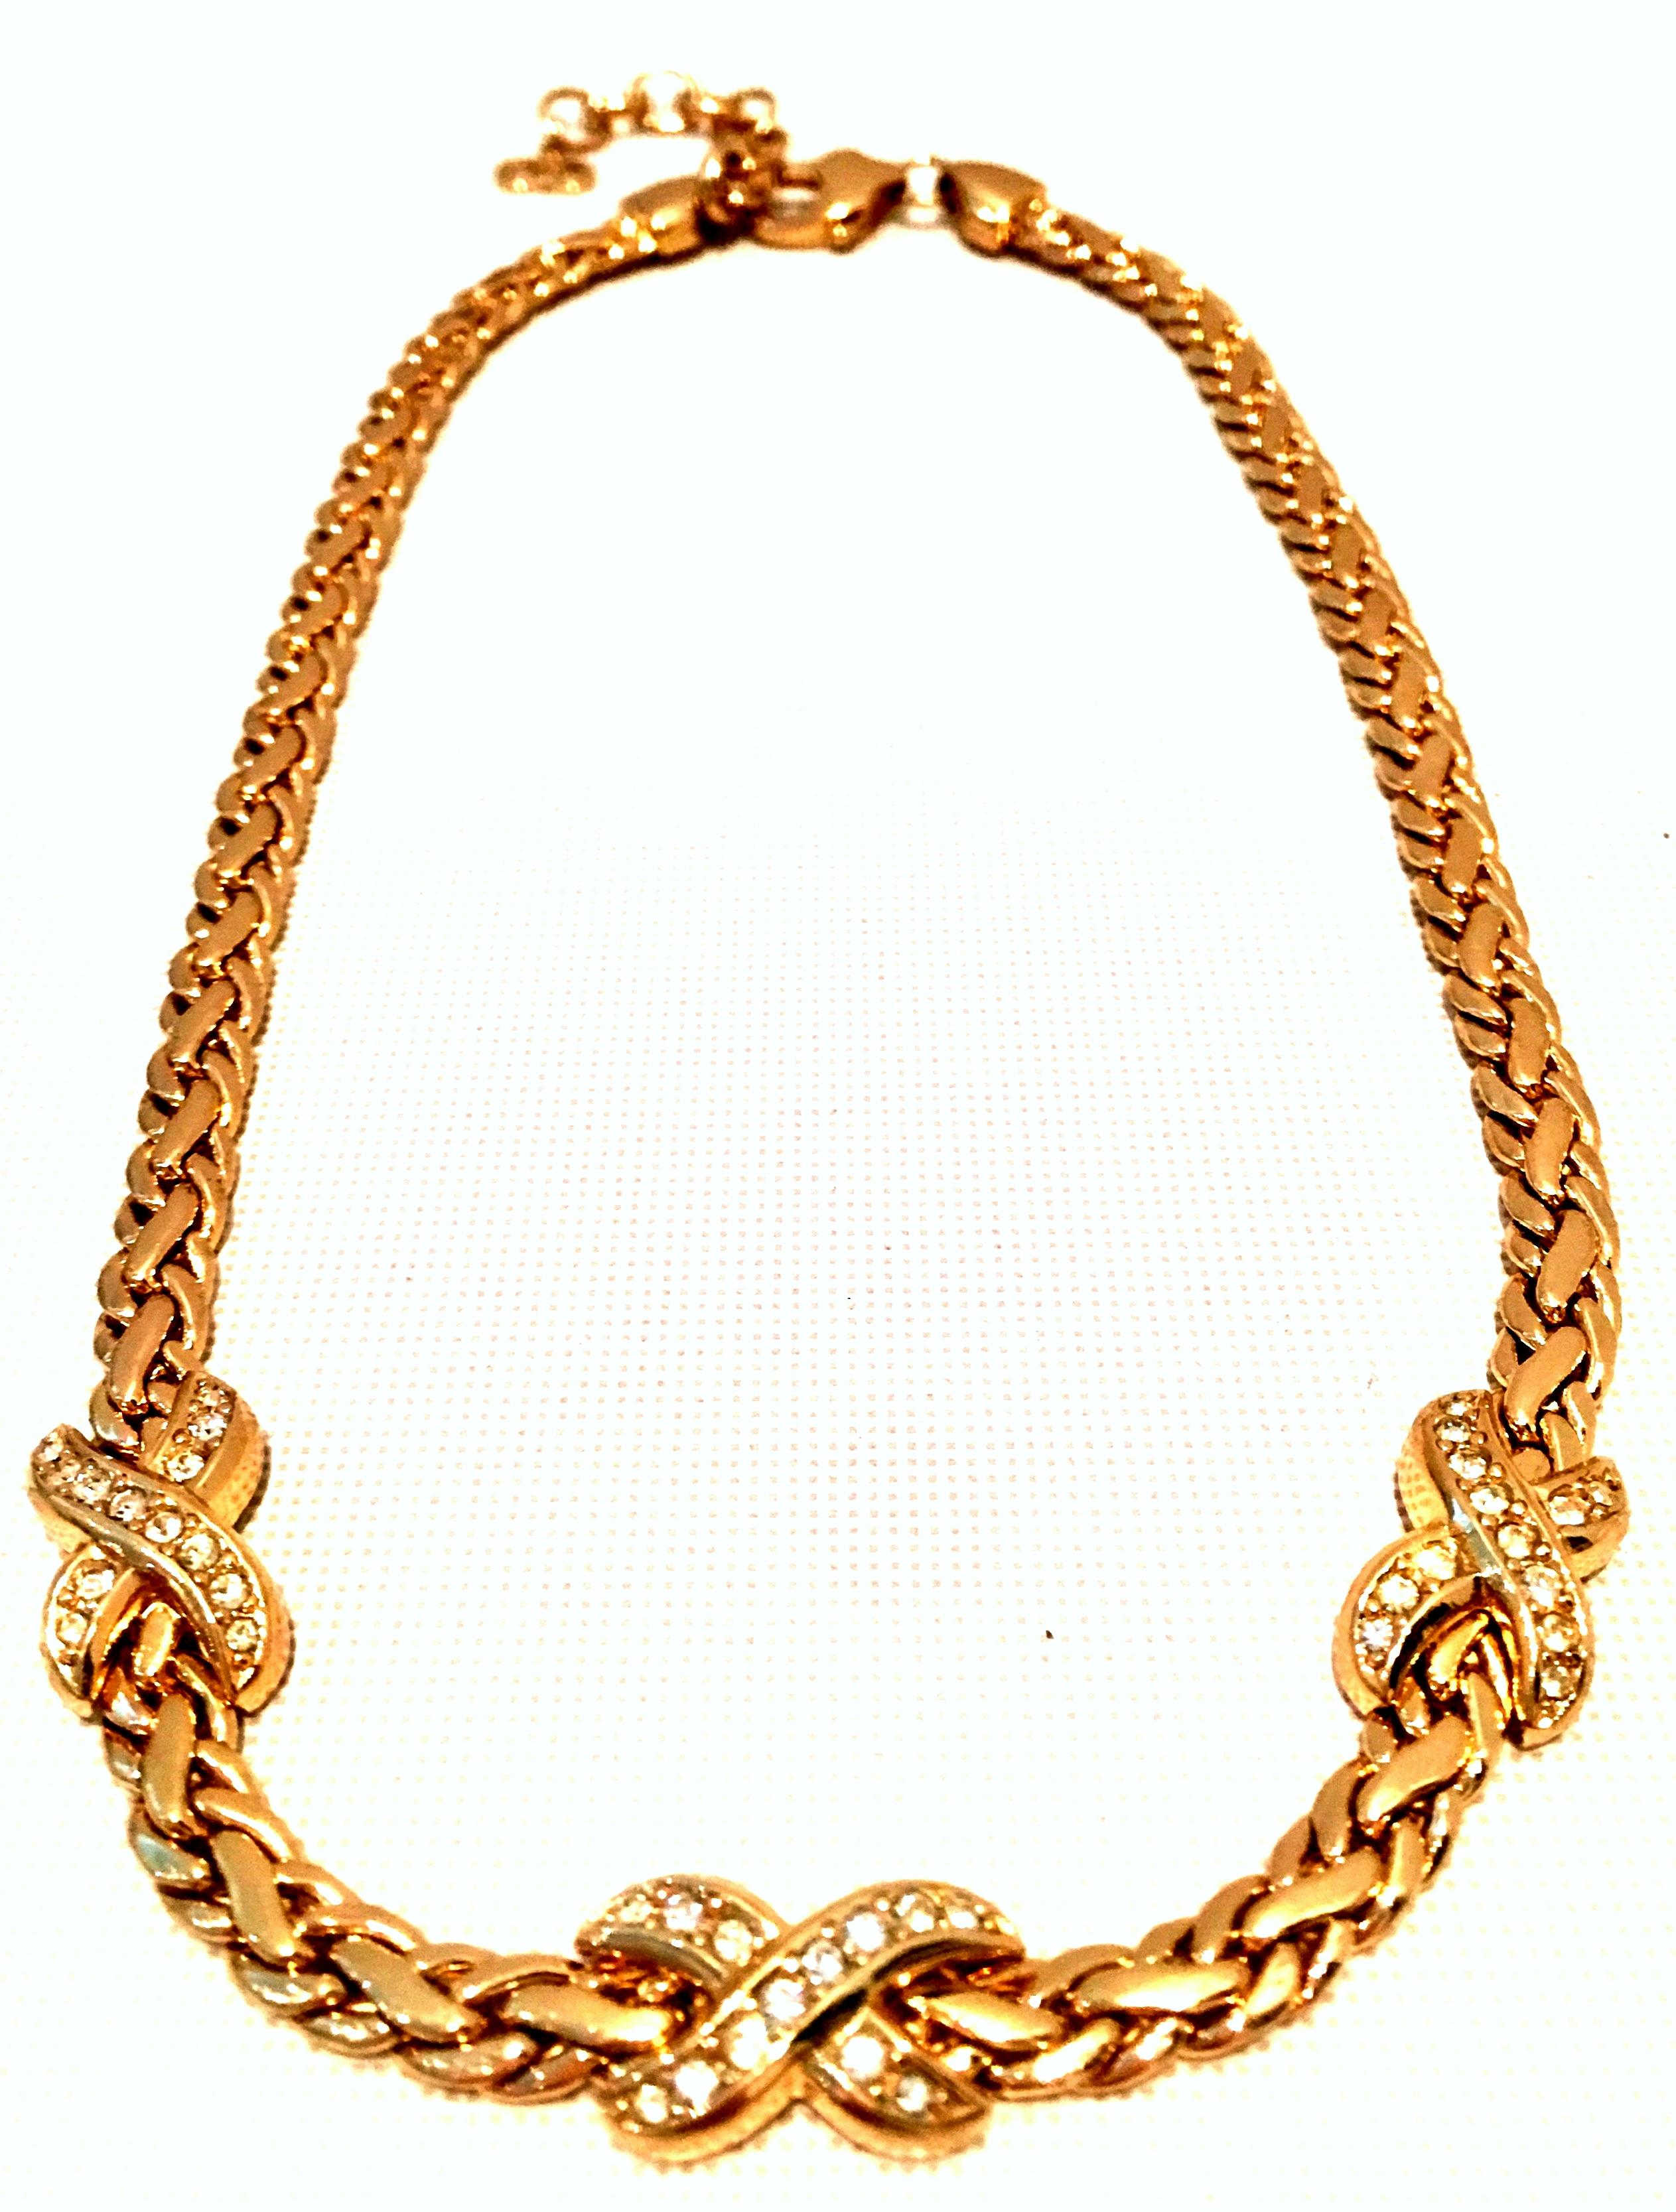 20th Century Gold & Swaorovski Crystal Choker Style Necklace By, Christian Dior 7